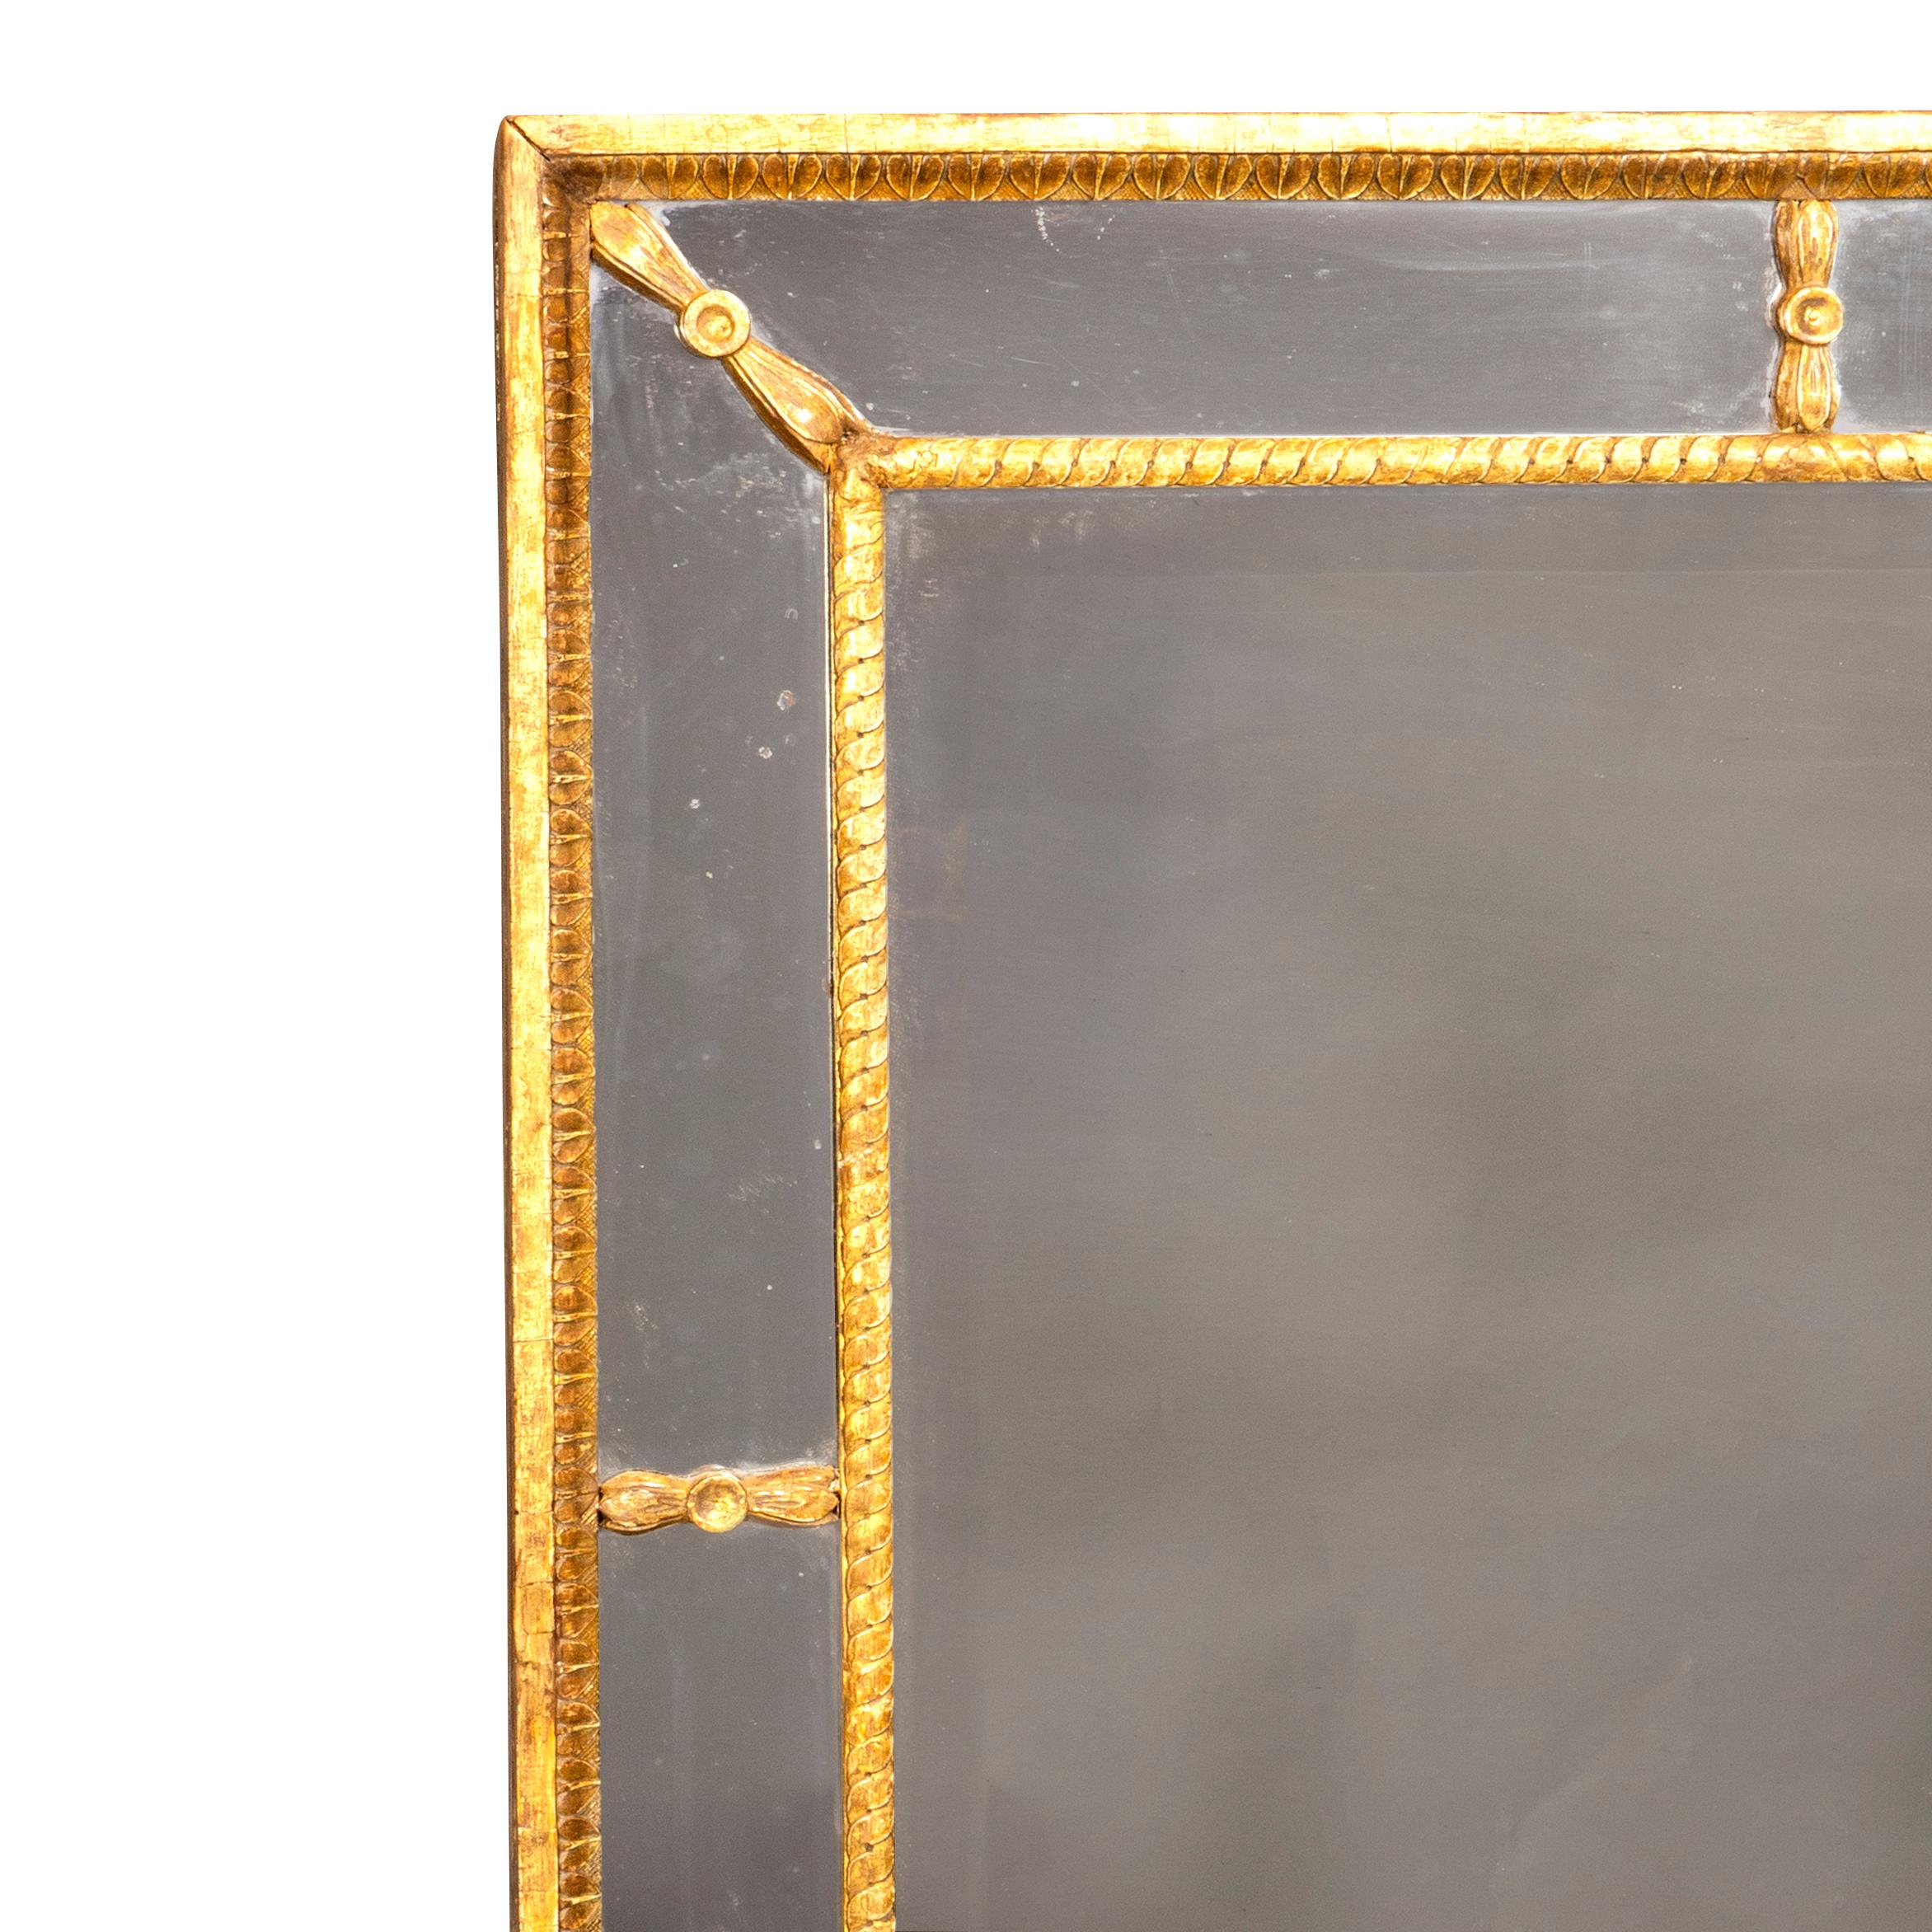 Regency Giltwood Mirror In Good Condition For Sale In Essex, MA